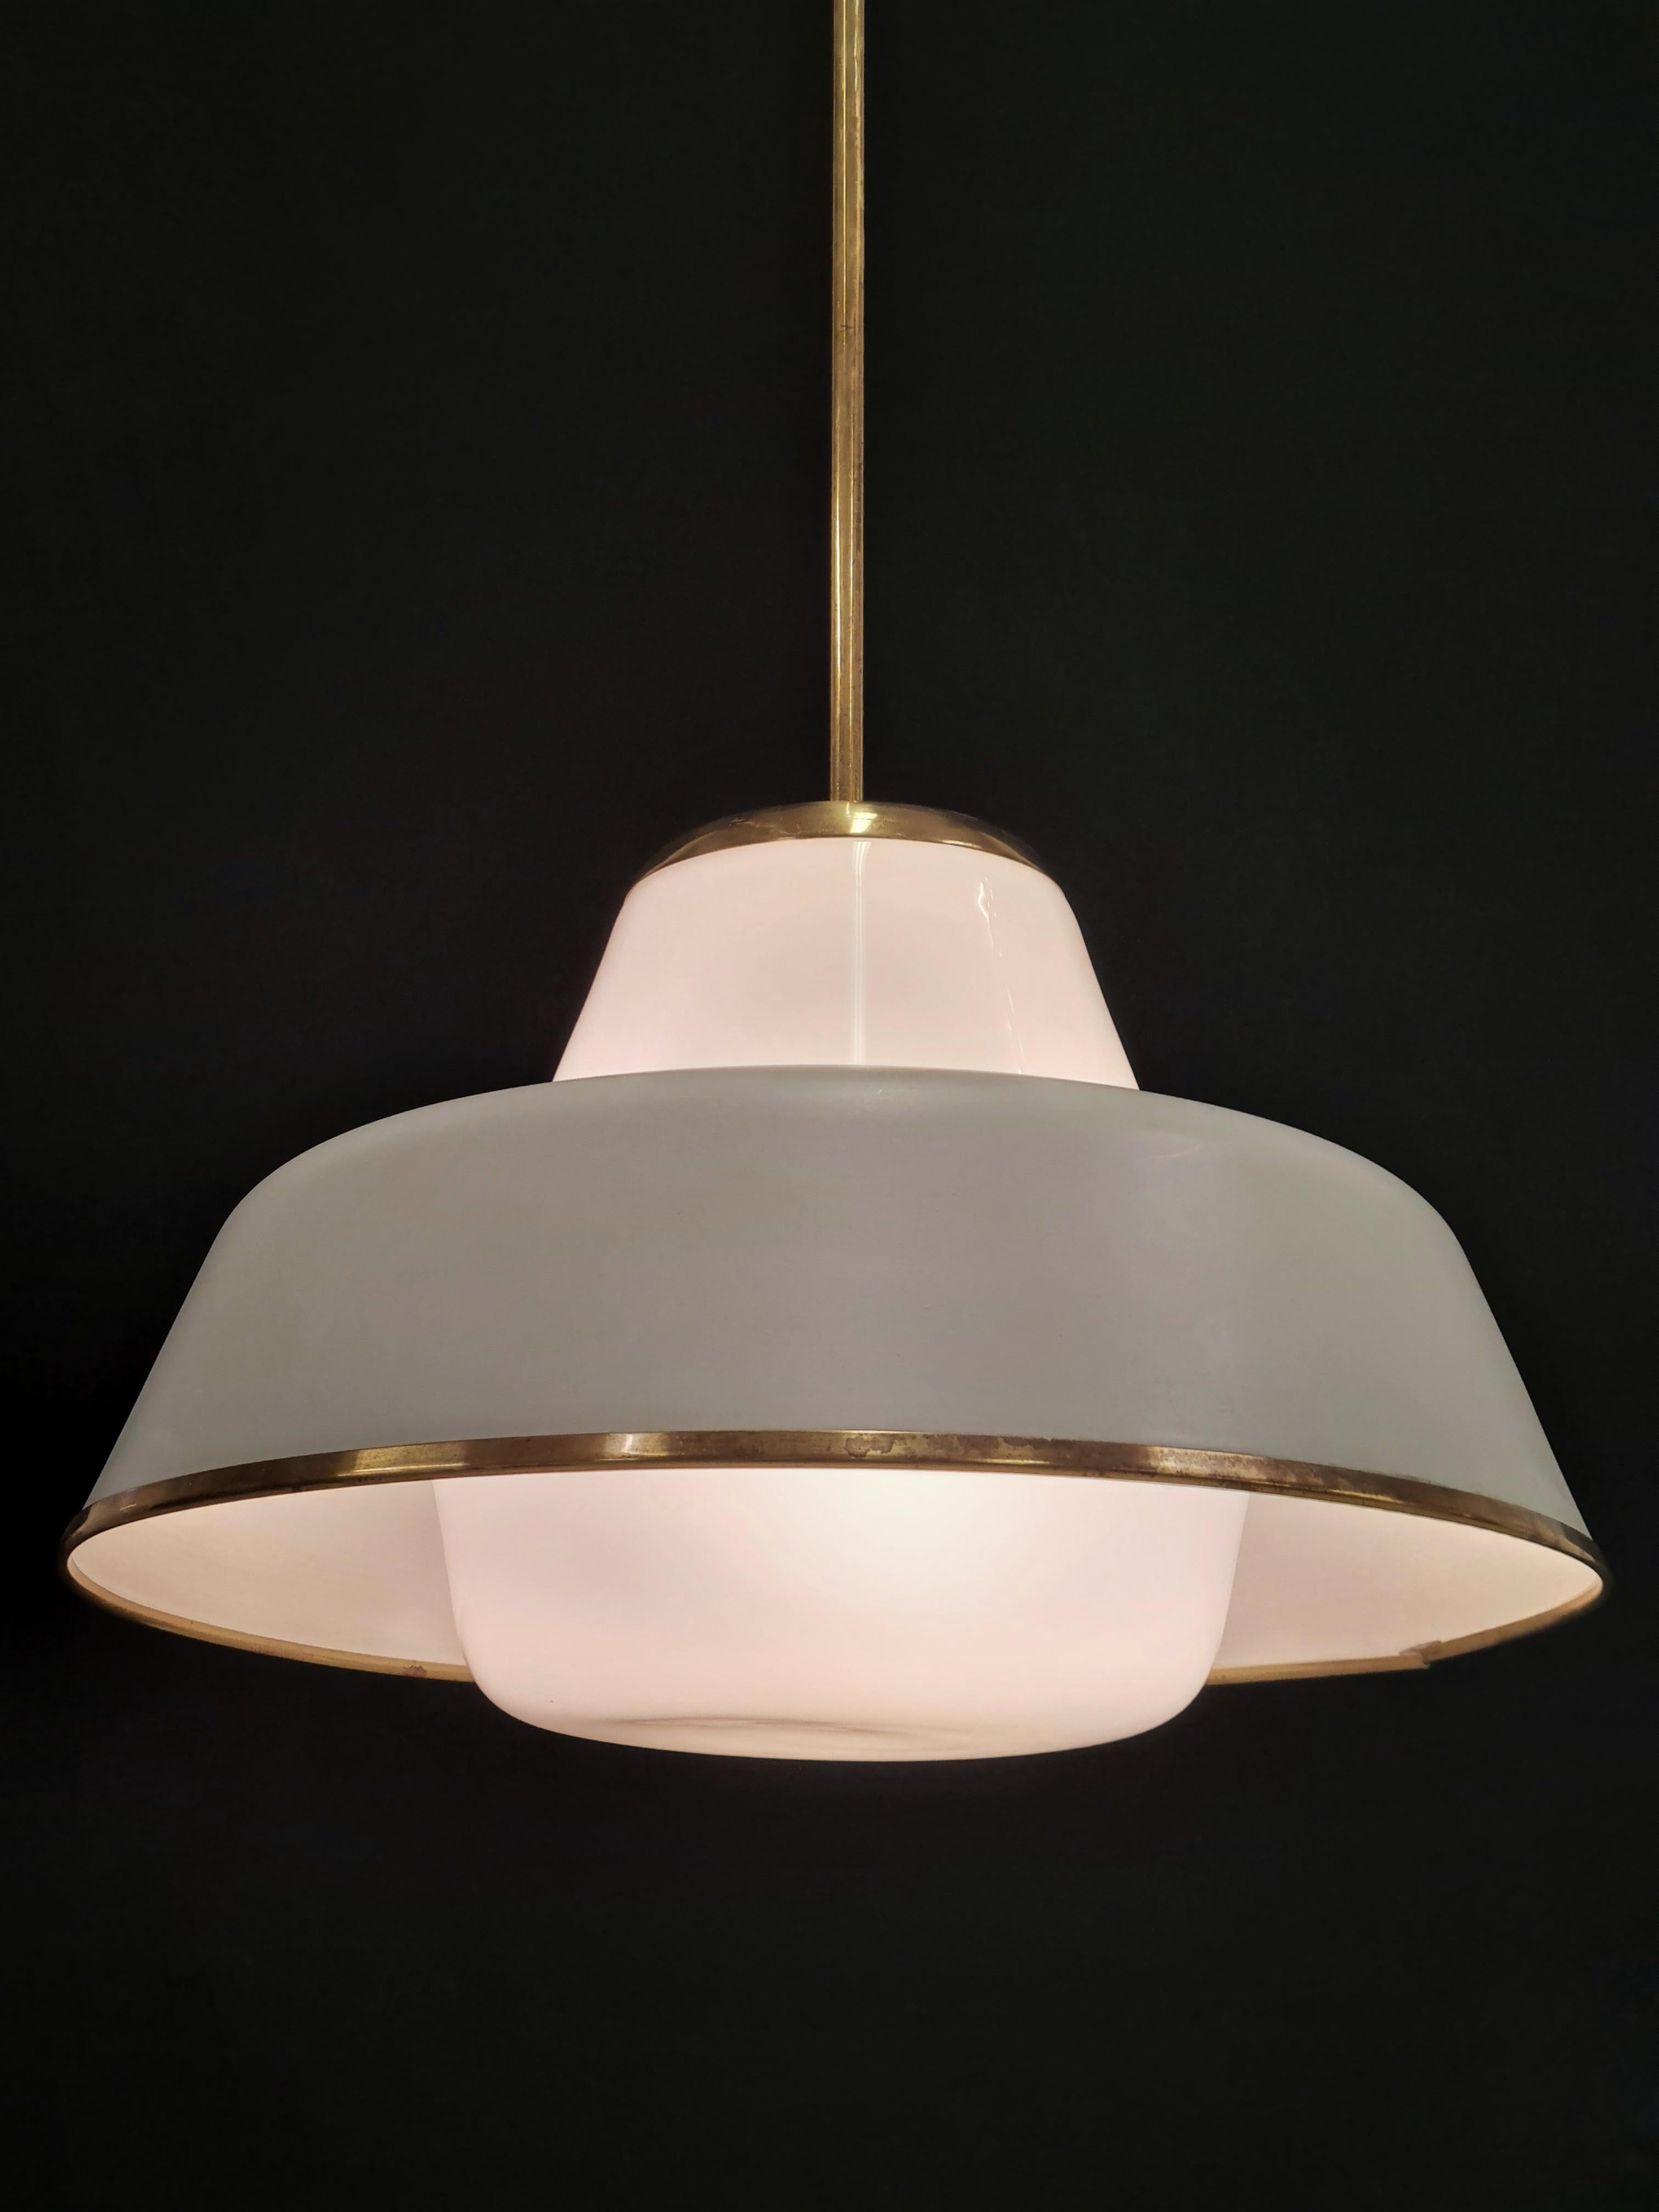 Lisa Johansson-Papé Ceiling Pendant Model 61-347 for Orno In Good Condition For Sale In Helsinki, FI